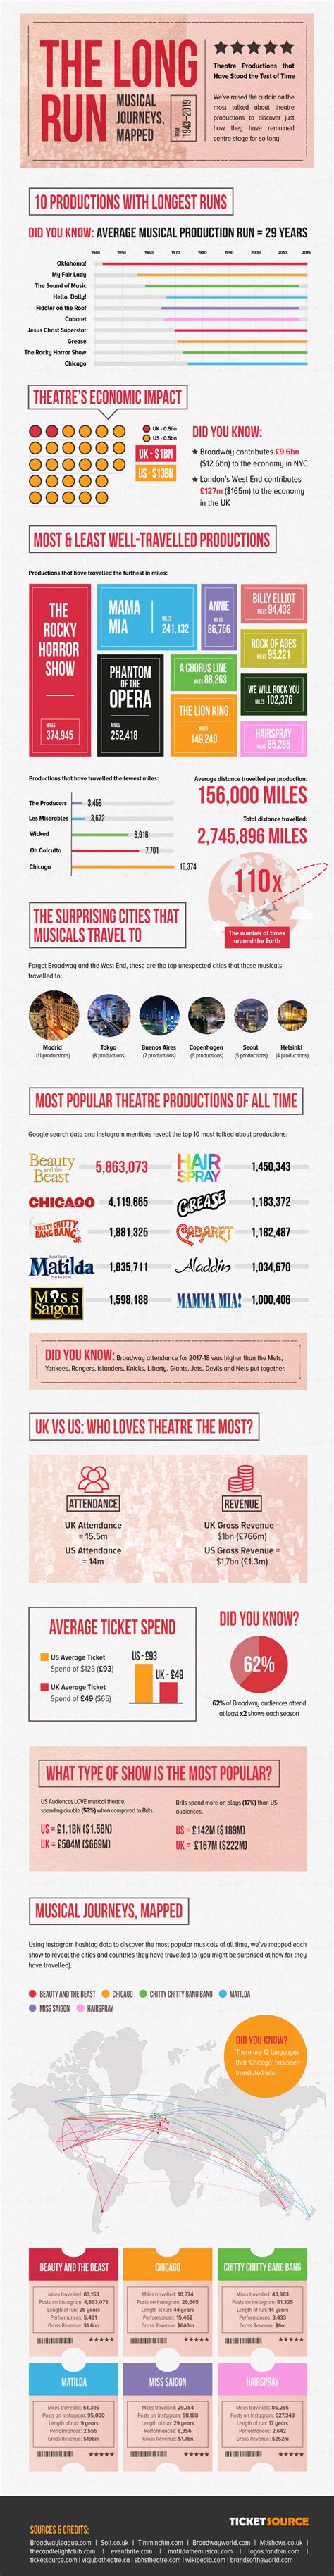 Revealed The Most Popular Musicals Of All Time